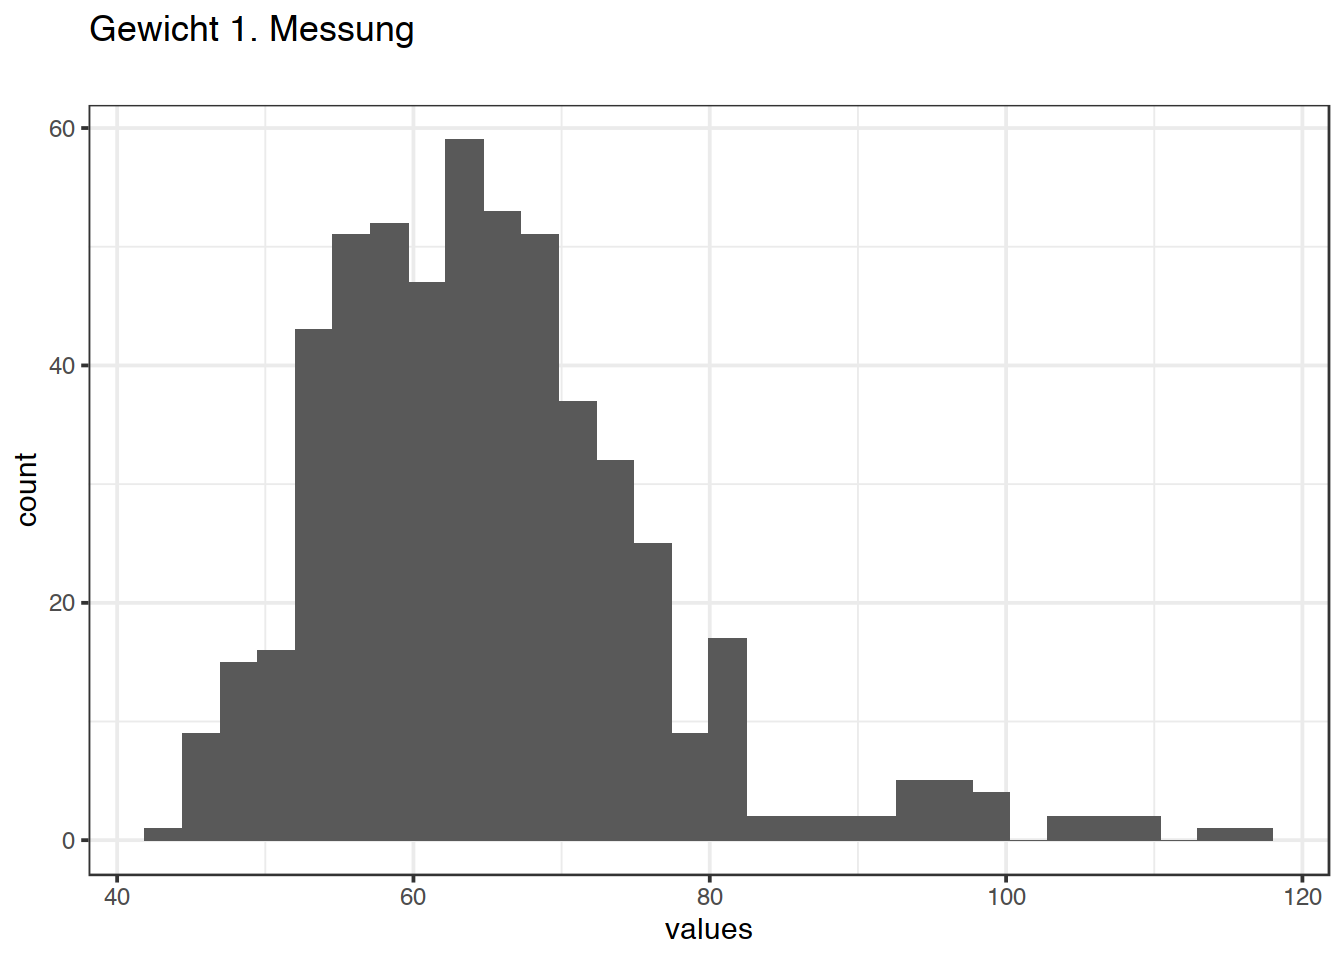 Distribution of values for Gewicht 1. Messung